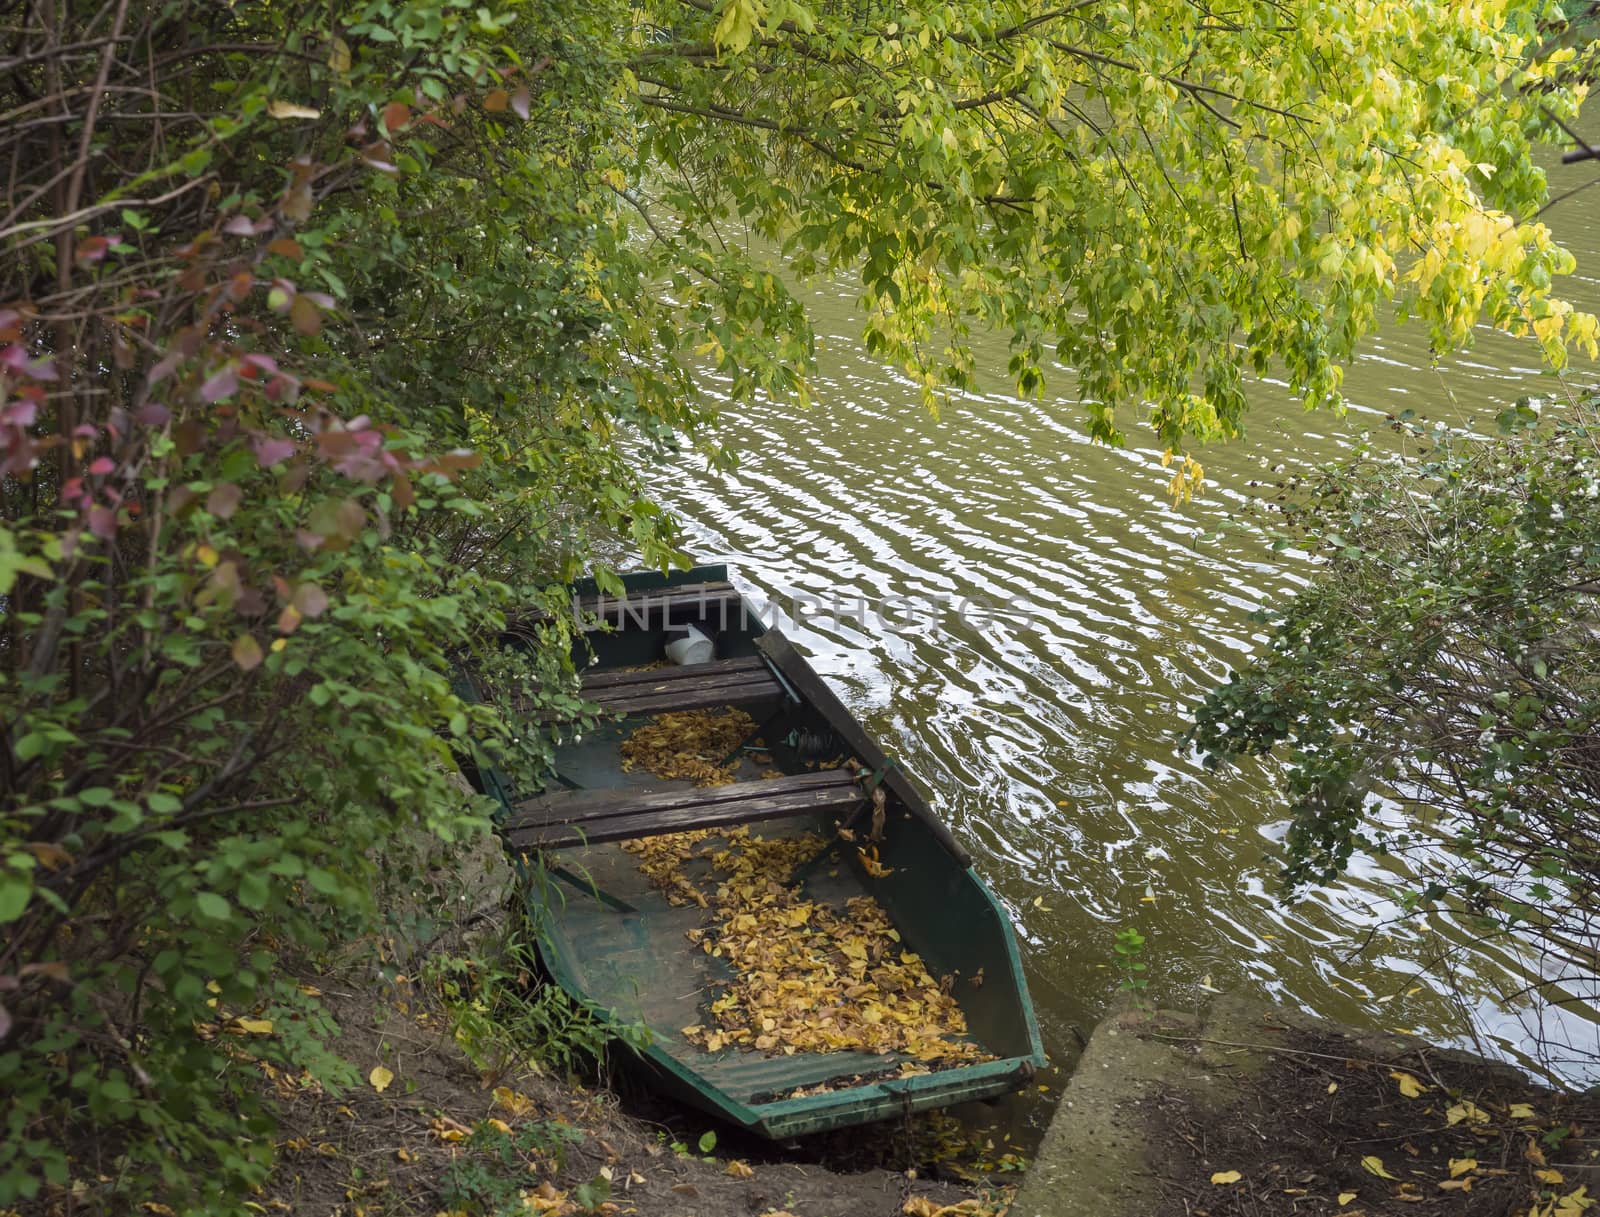 Old rowing boat with fallen leaves on the river bank in autumn with trees, countryside in golden afternoon light.